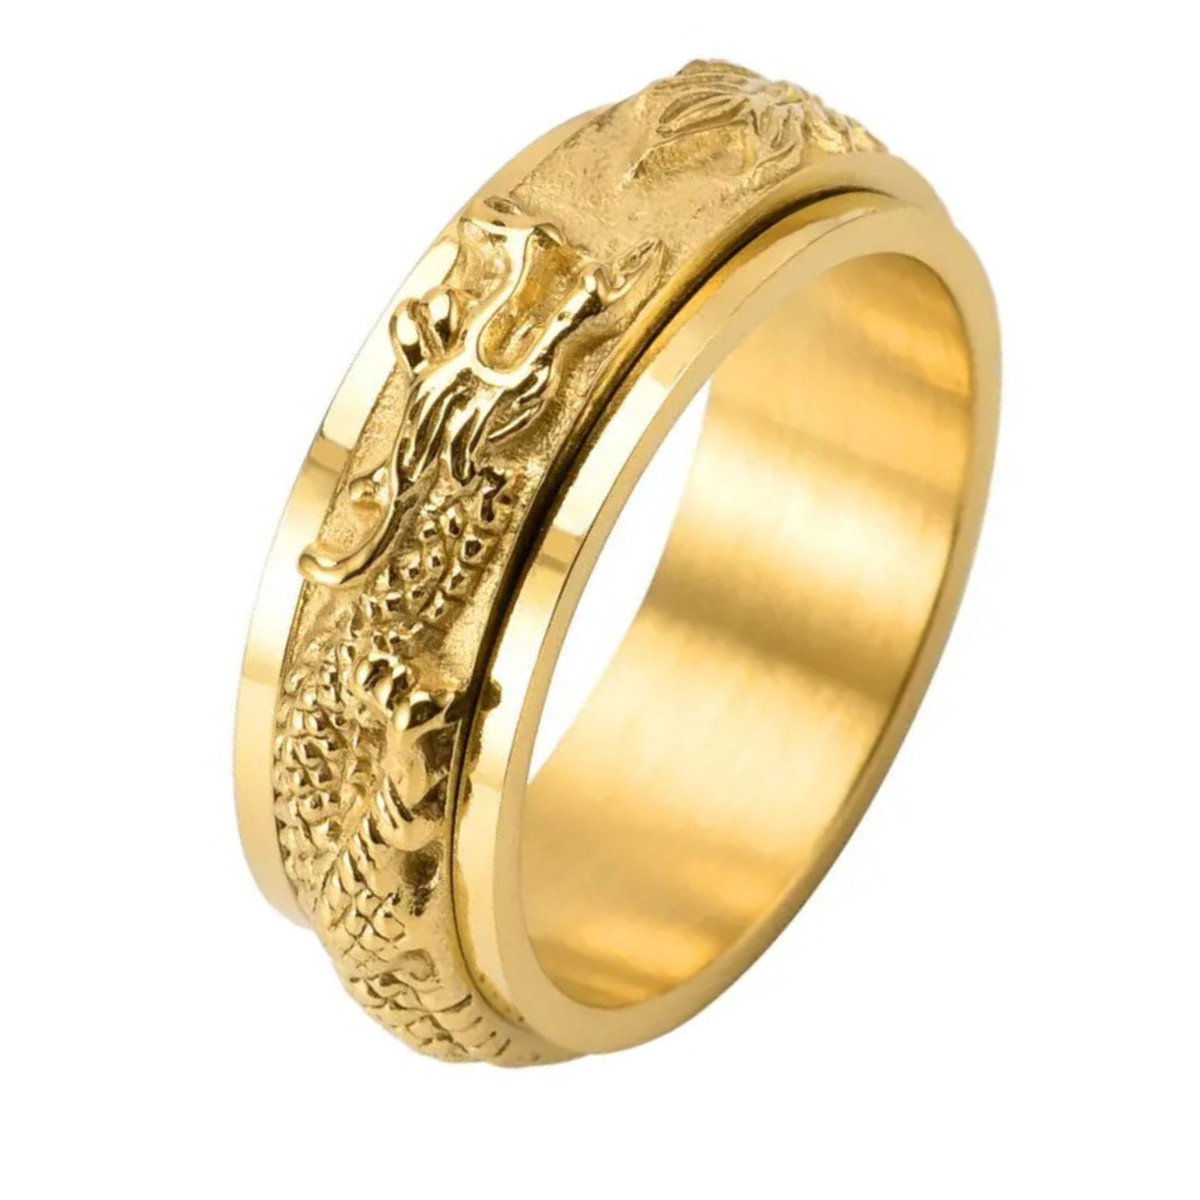 Anxiety Ring - (Draak) - Stress Ring - Fidget Ring - Anxiety Ring For Finger - Draaibare Ring - Spinning Ring - Goud - (19.00 mm / maat 60)